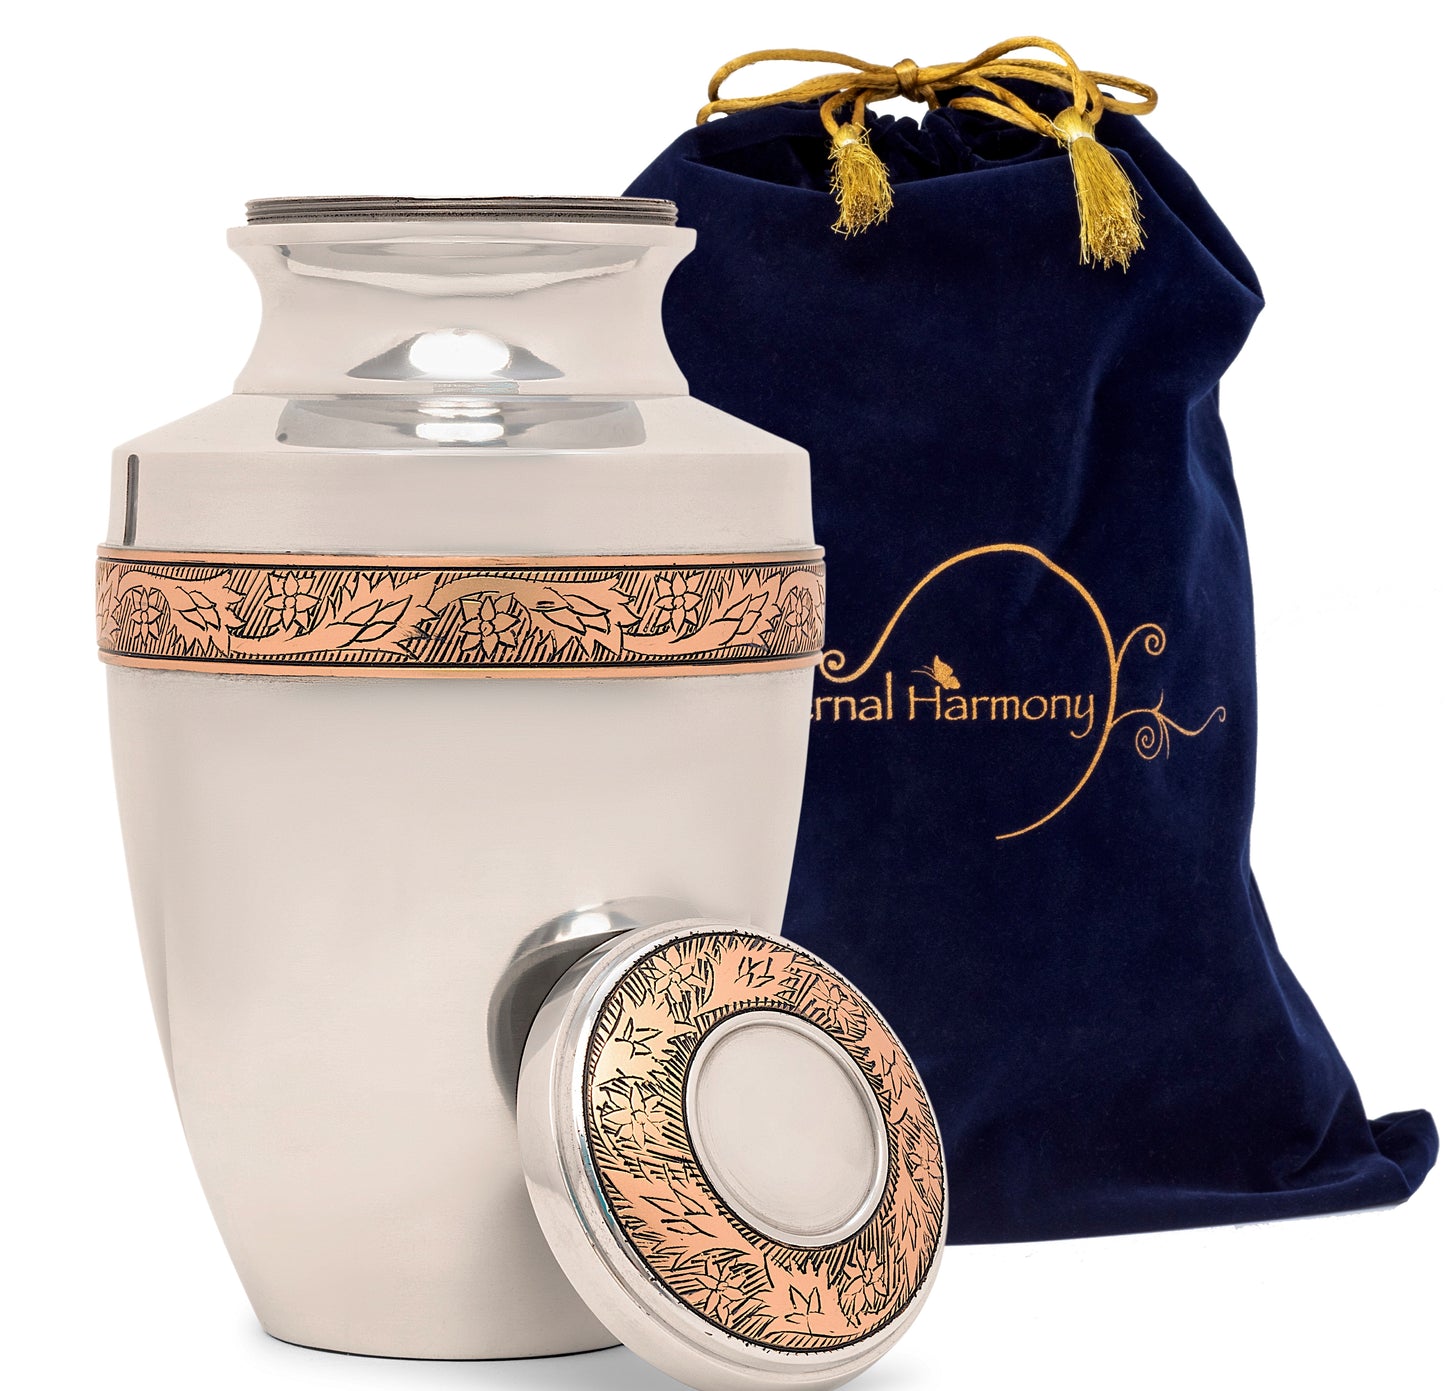 Adult Urn in Eternity Silver Gold